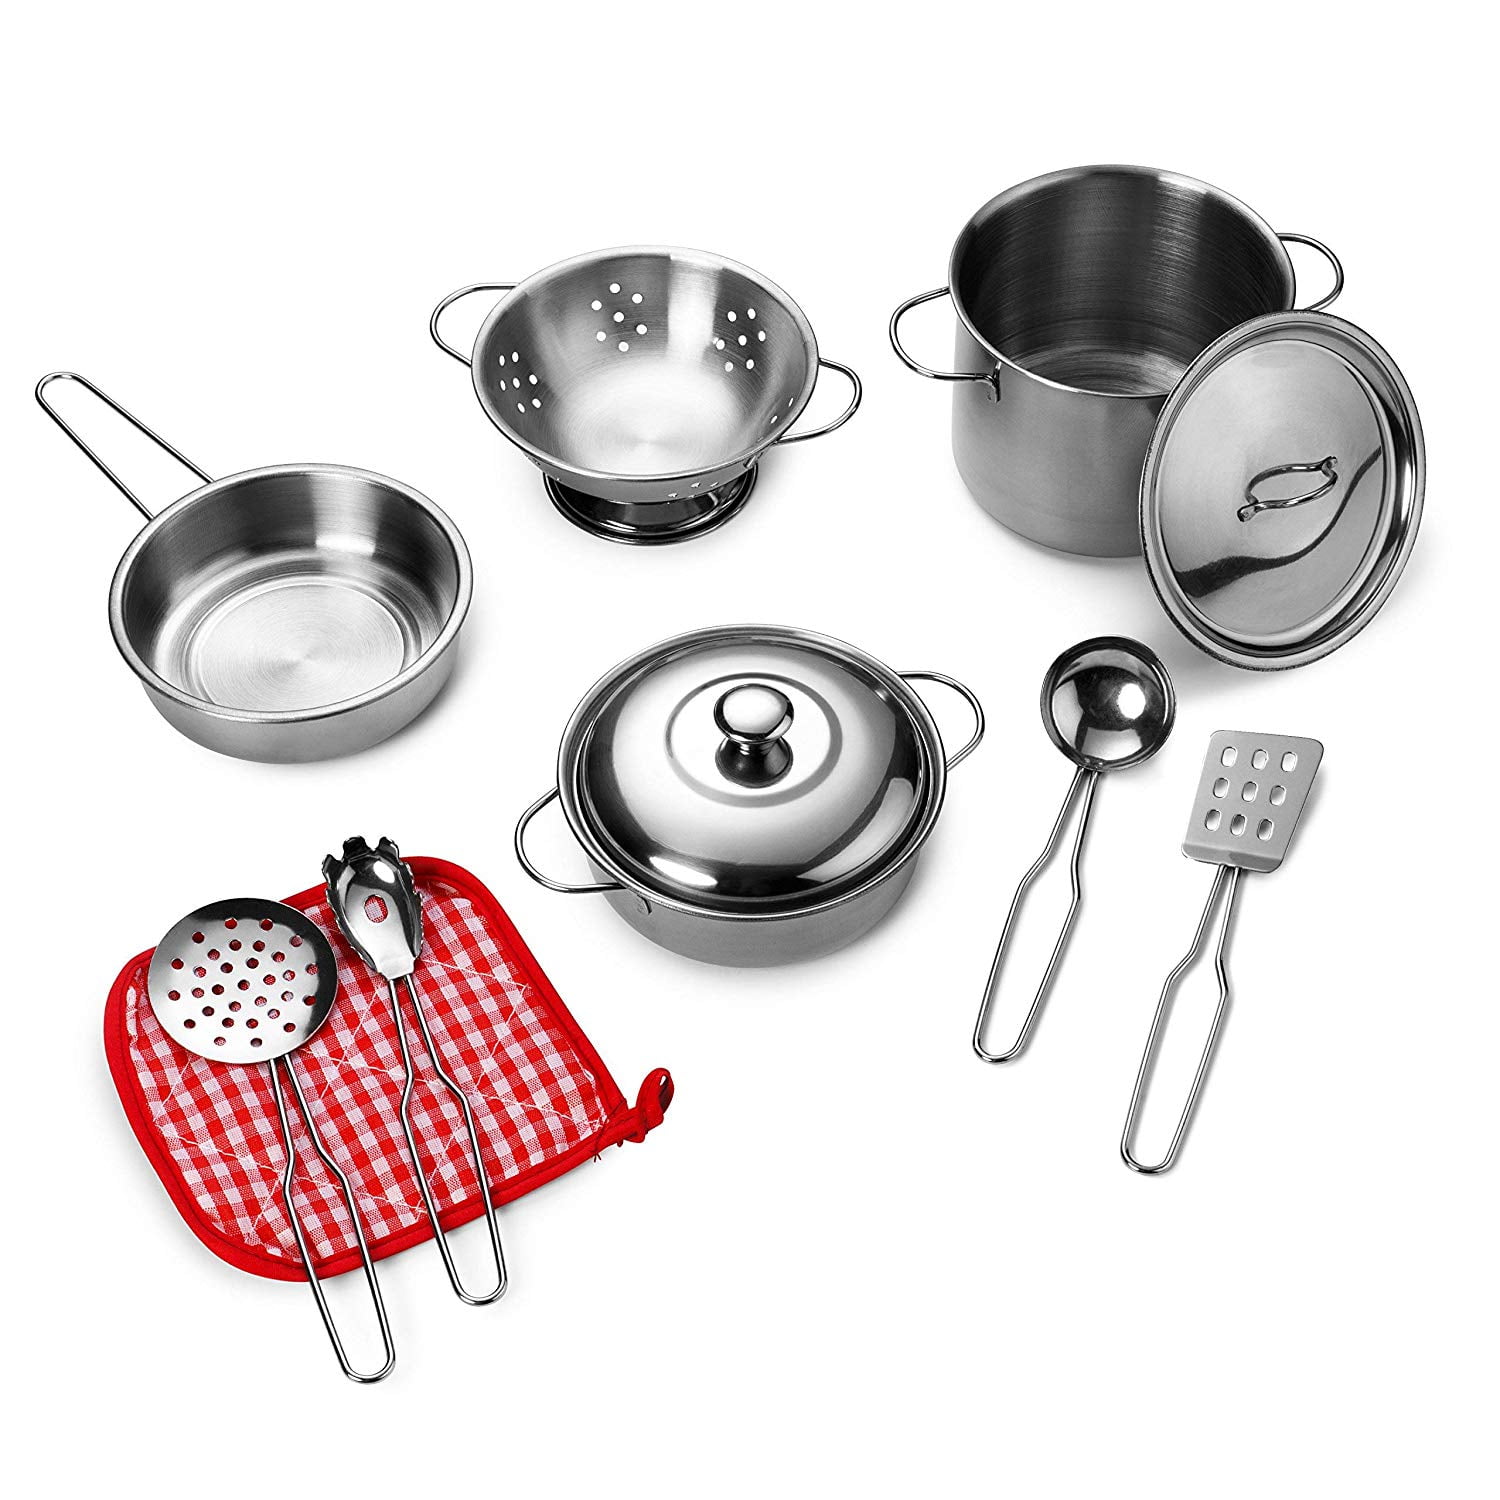 VIPAMZ My First Play Kitchen Toys Pretend Cooking Toy Cookware Playset for Kids 11-Pieces Stainless Steel Pots and Pans with Cooking Utensils 